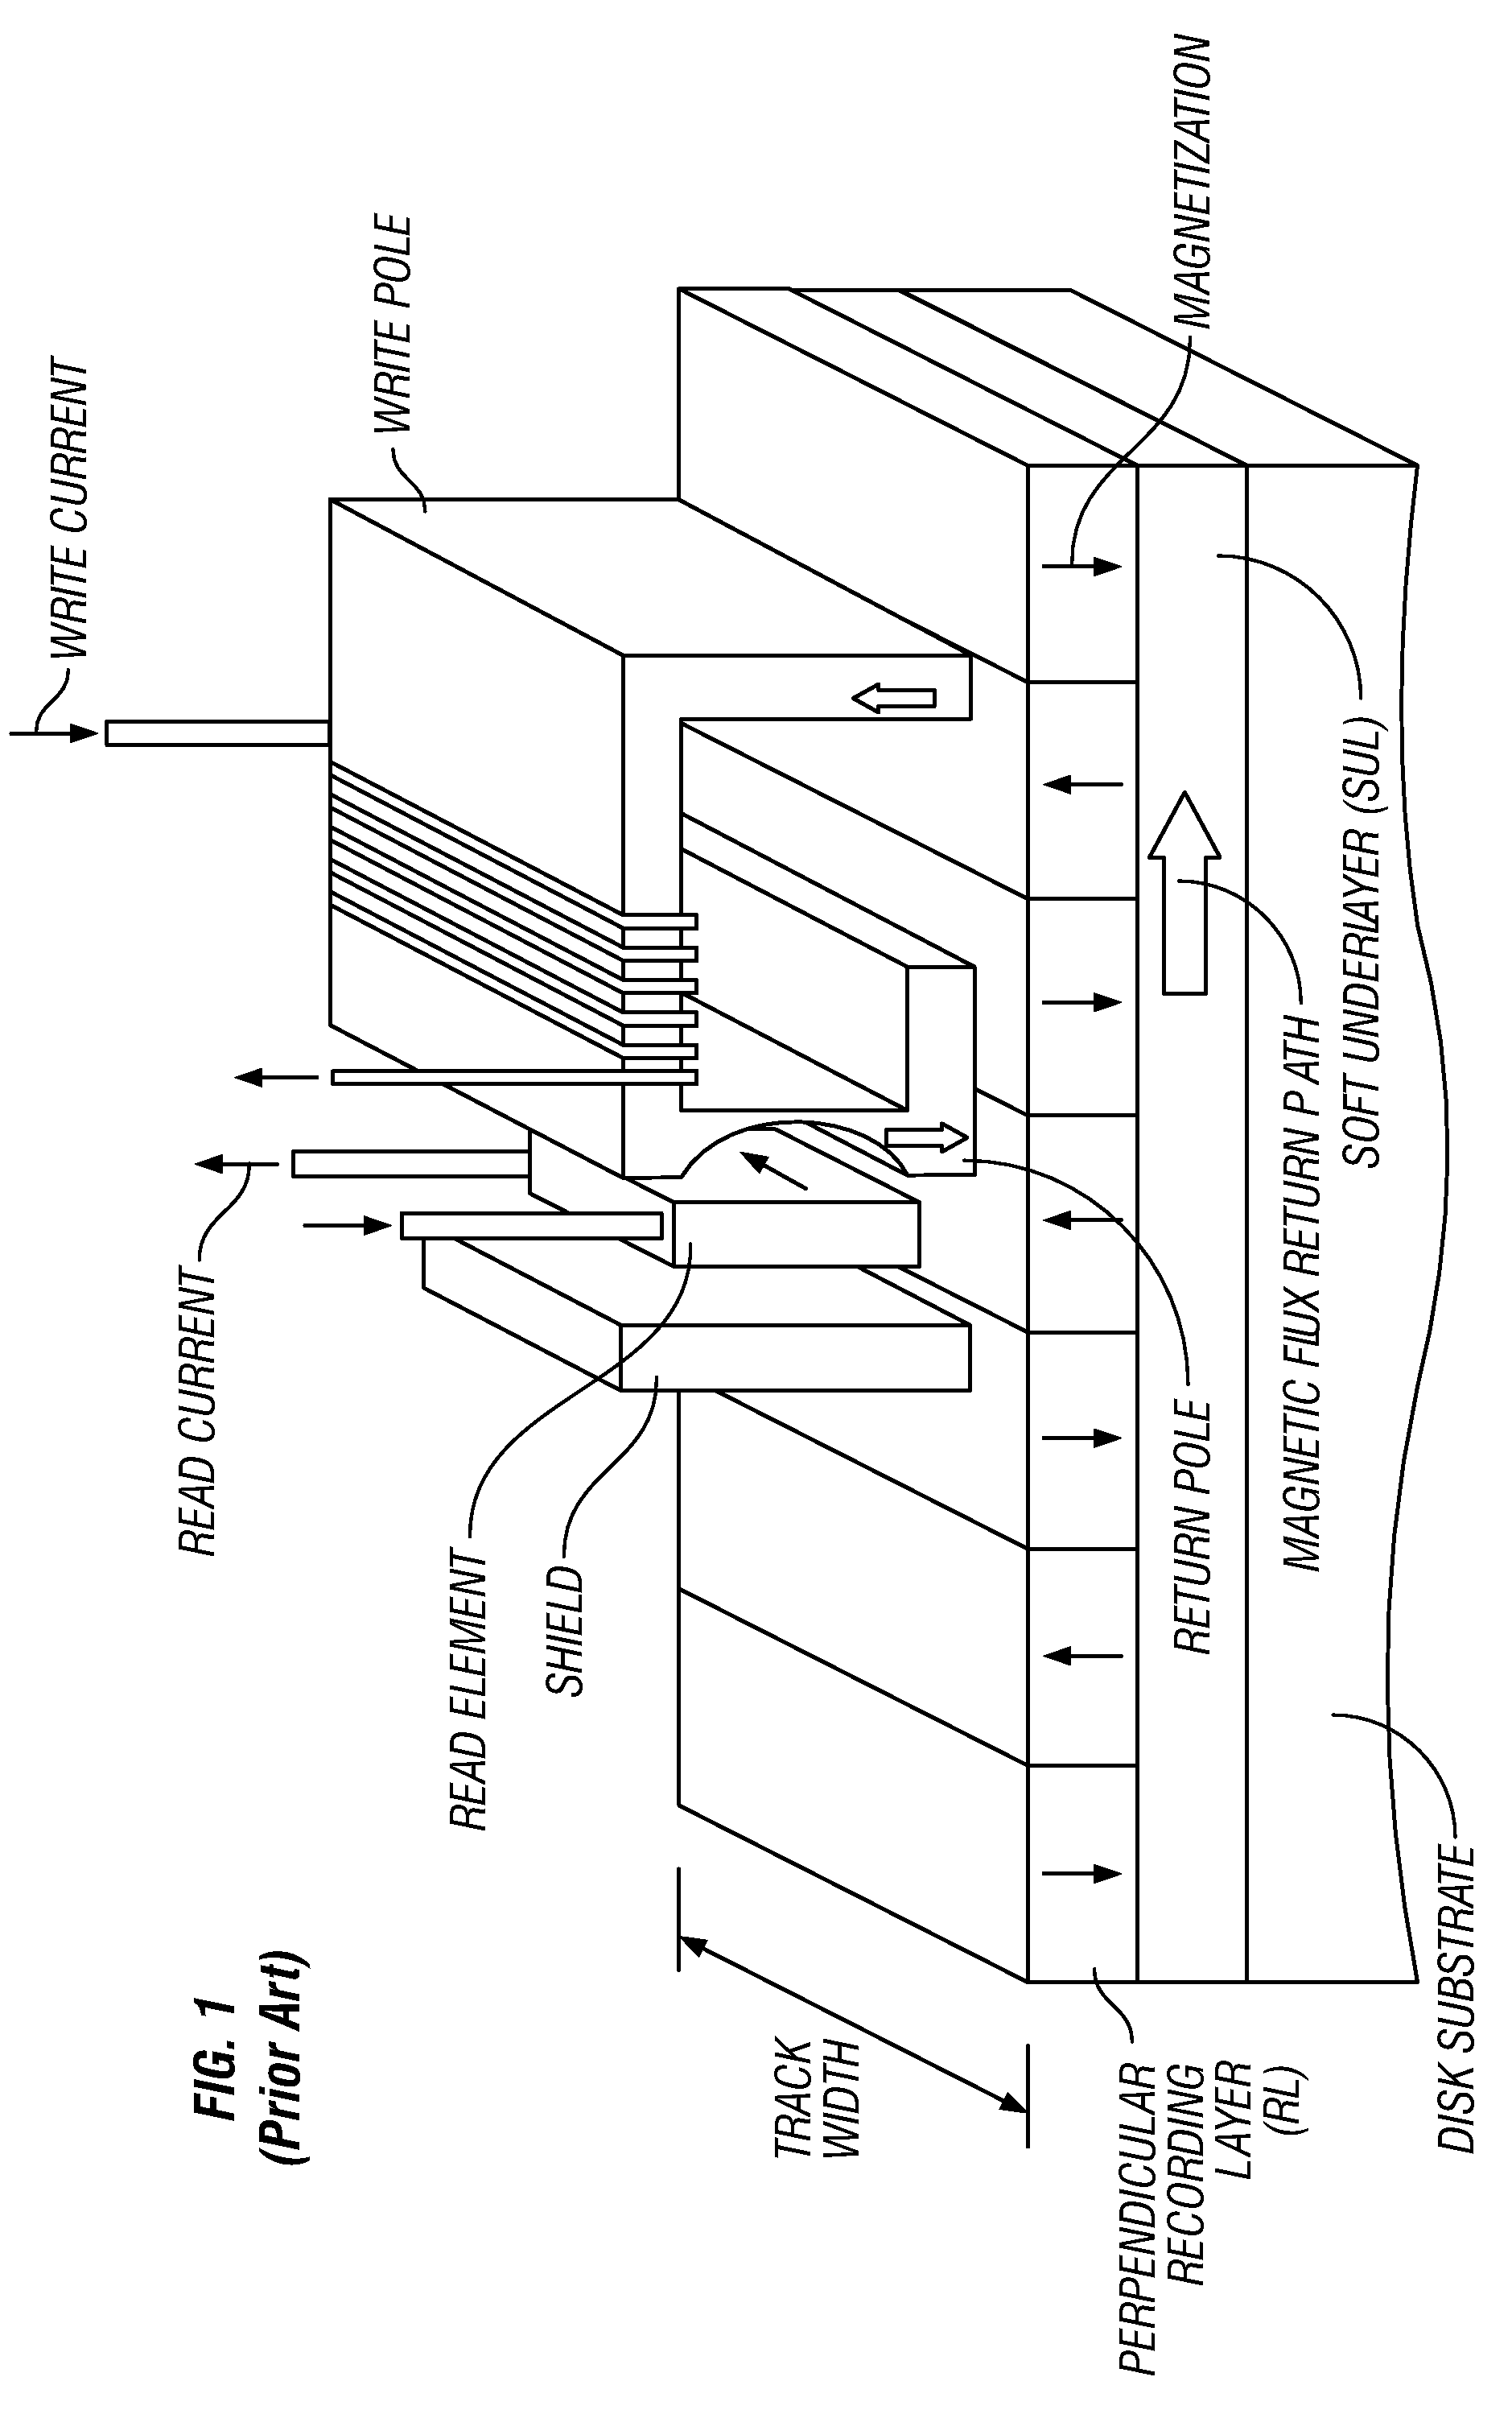 Perpendicular magnetic recording medium with laminated magnetic layers separated by a ferromagnetic  interlayer for intergranular exchange-coupling enhancement